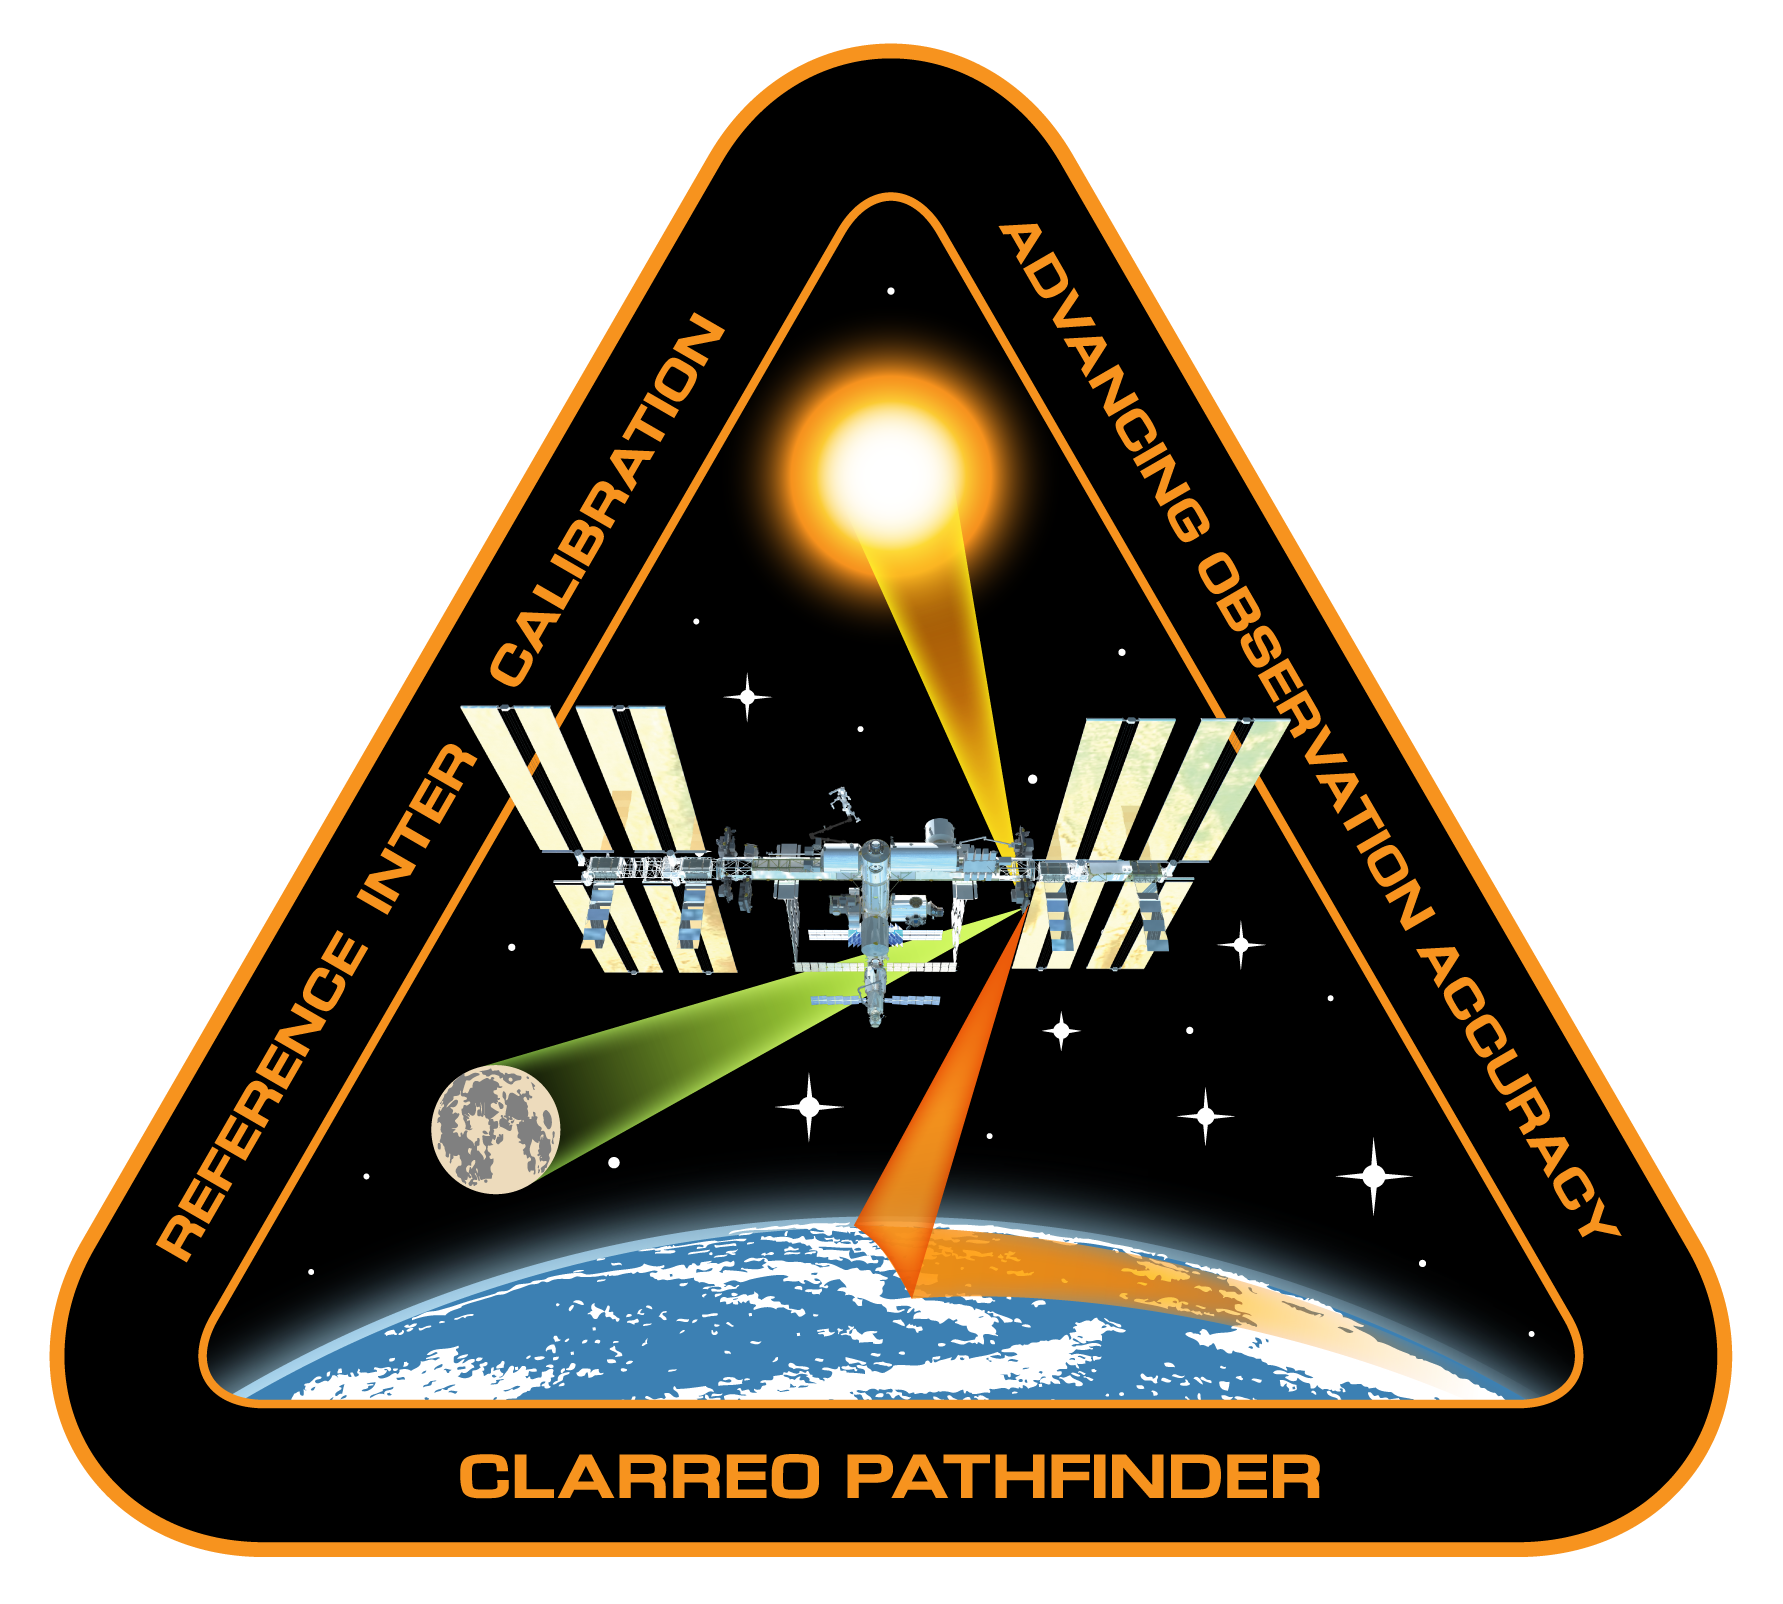 Climate Absolute Radiance and Refractivity Observatory Pathfinder mission-logo